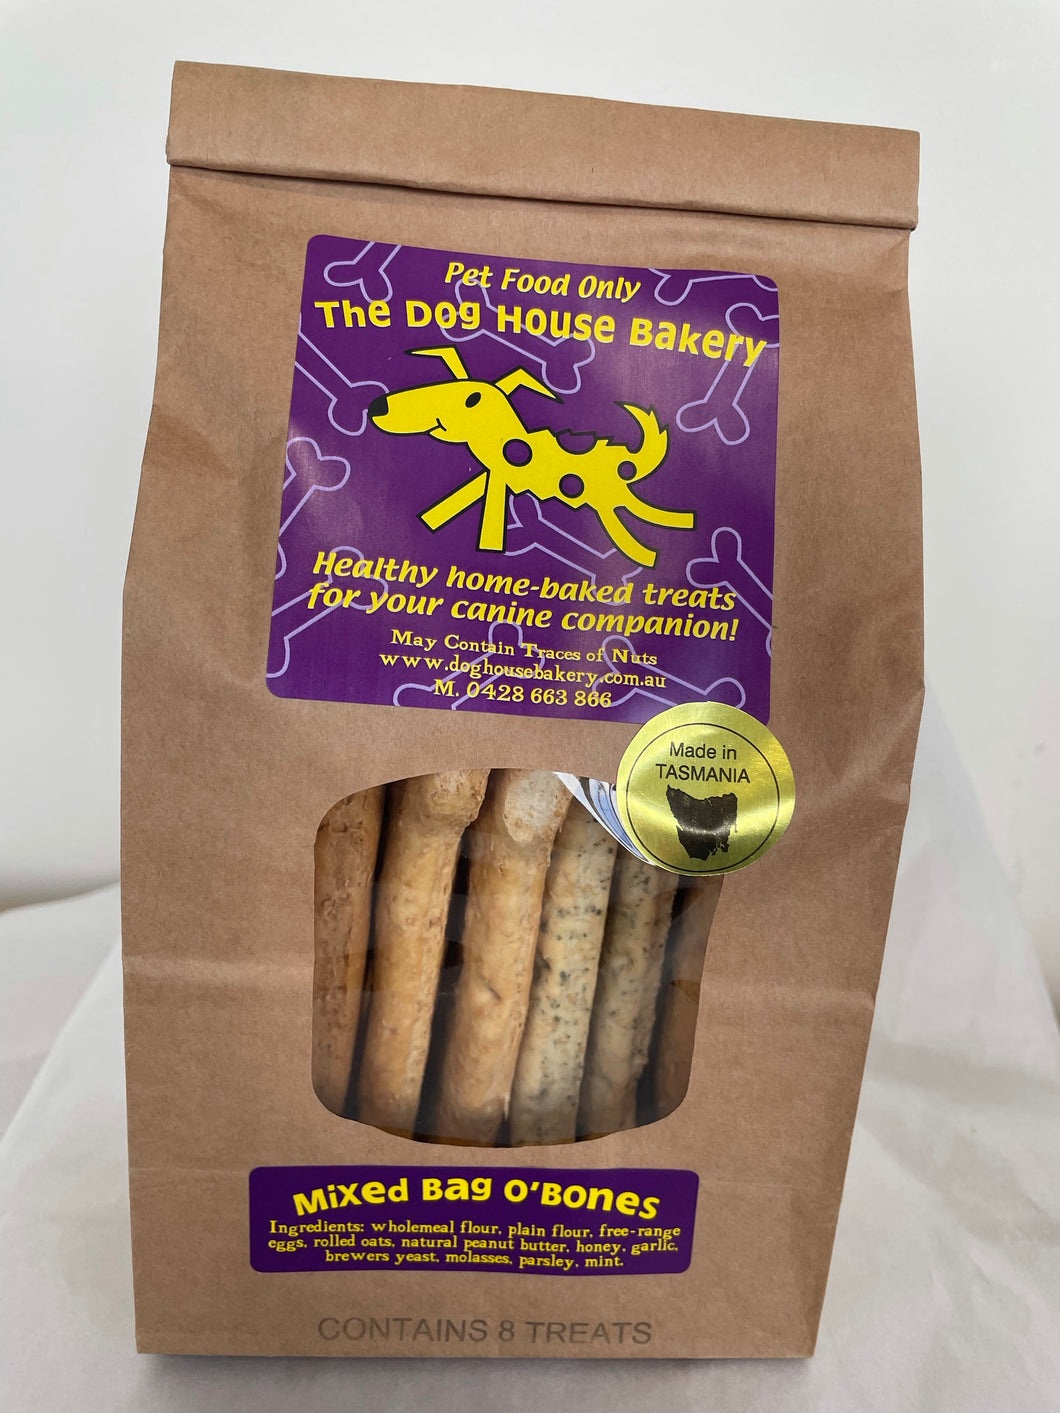 Our Great Value Pack !  Save when you choose 3 bags from our Large Bone range - Mixed Bag O'Bones, Tricky Treats, Dogs Breakfast, Itchy Scratchy, Chicken Chews, Liver Lover, and Breath Busters.